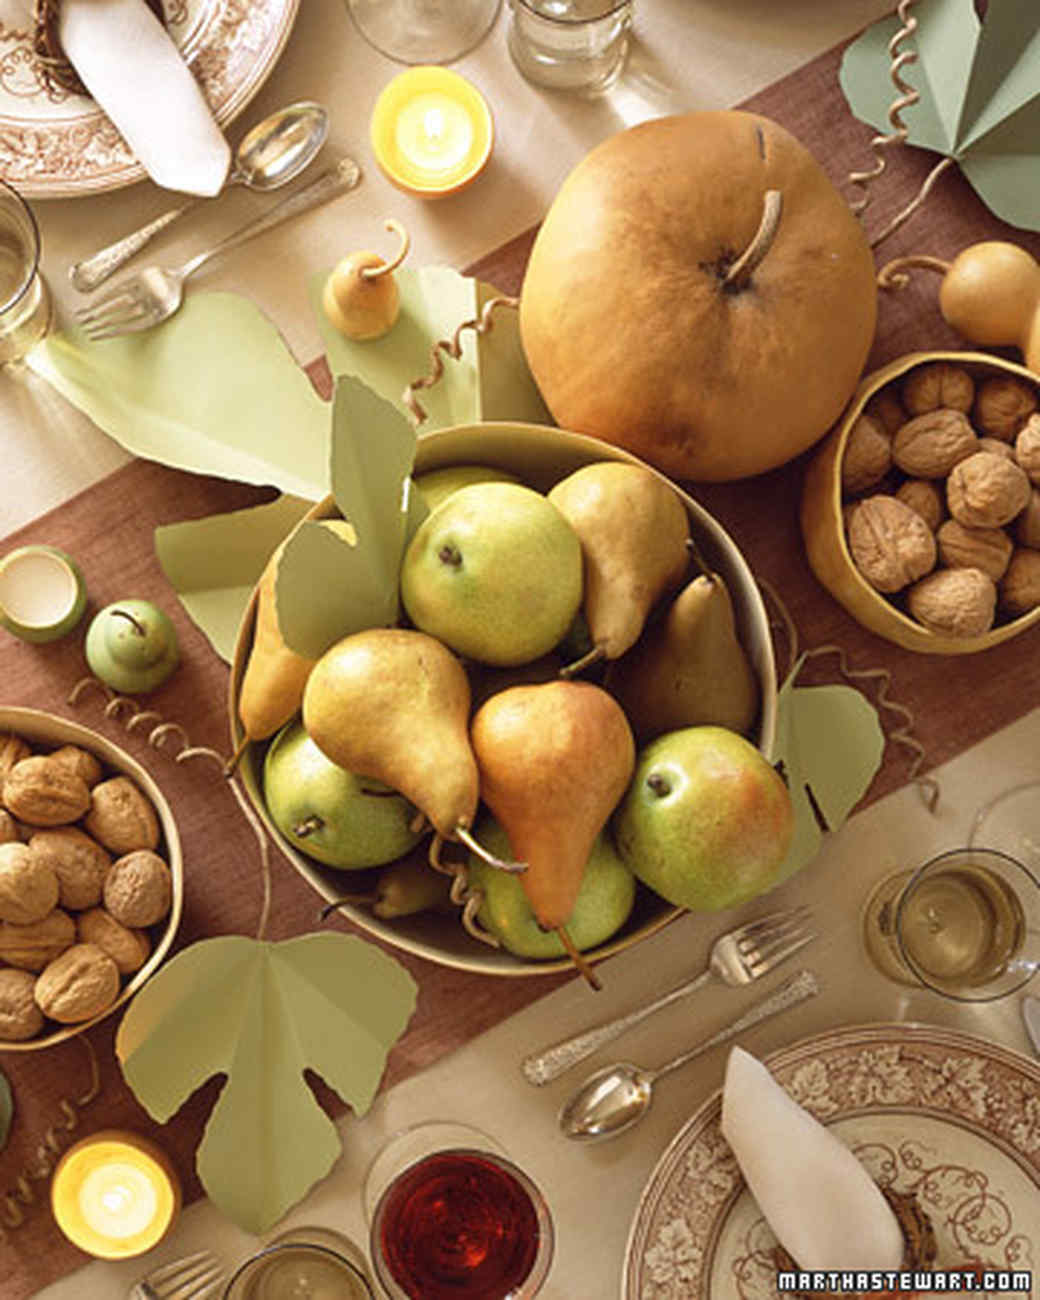 40 Thanksgiving Table Settings To Wow Your Guests